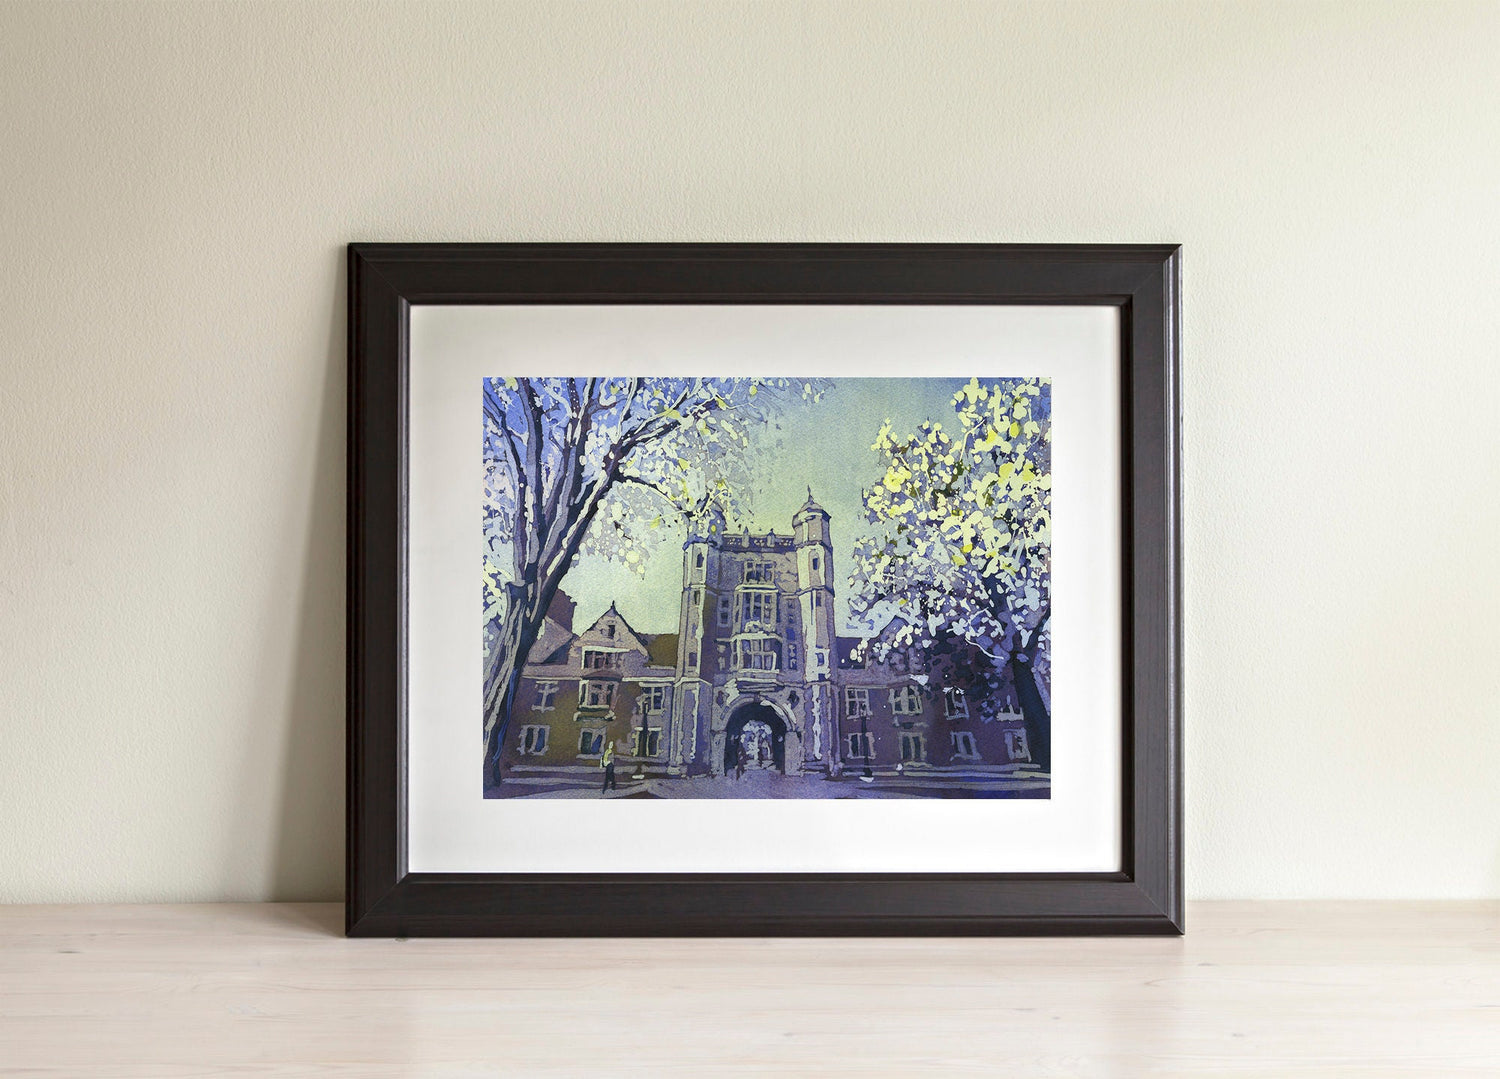 Law Library U of M Ann Arbor watercolor landscape painting